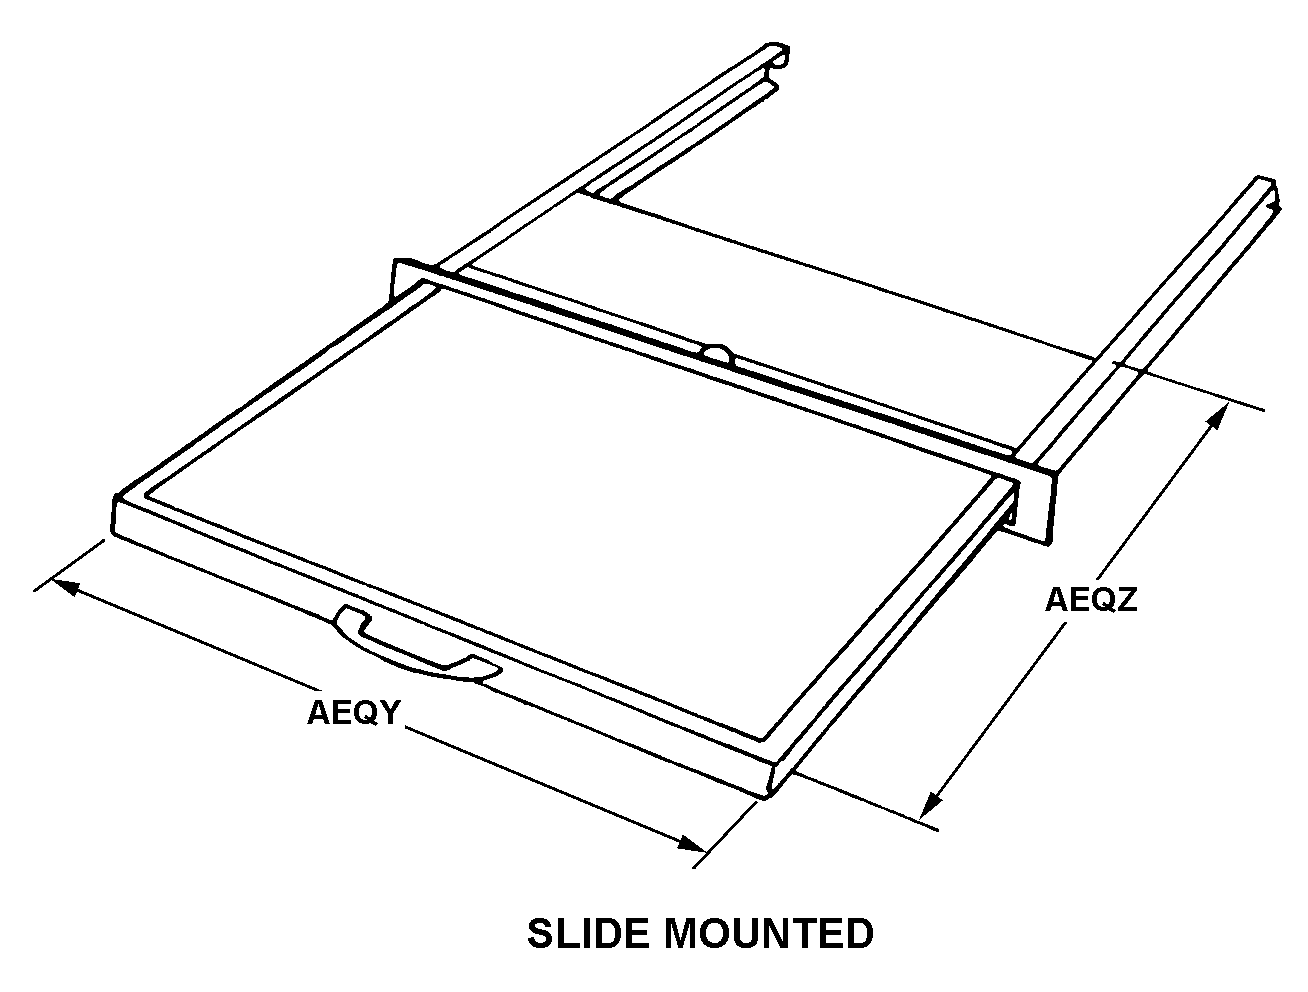 SLIDE MOUNTED style nsn 5975-01-571-6443